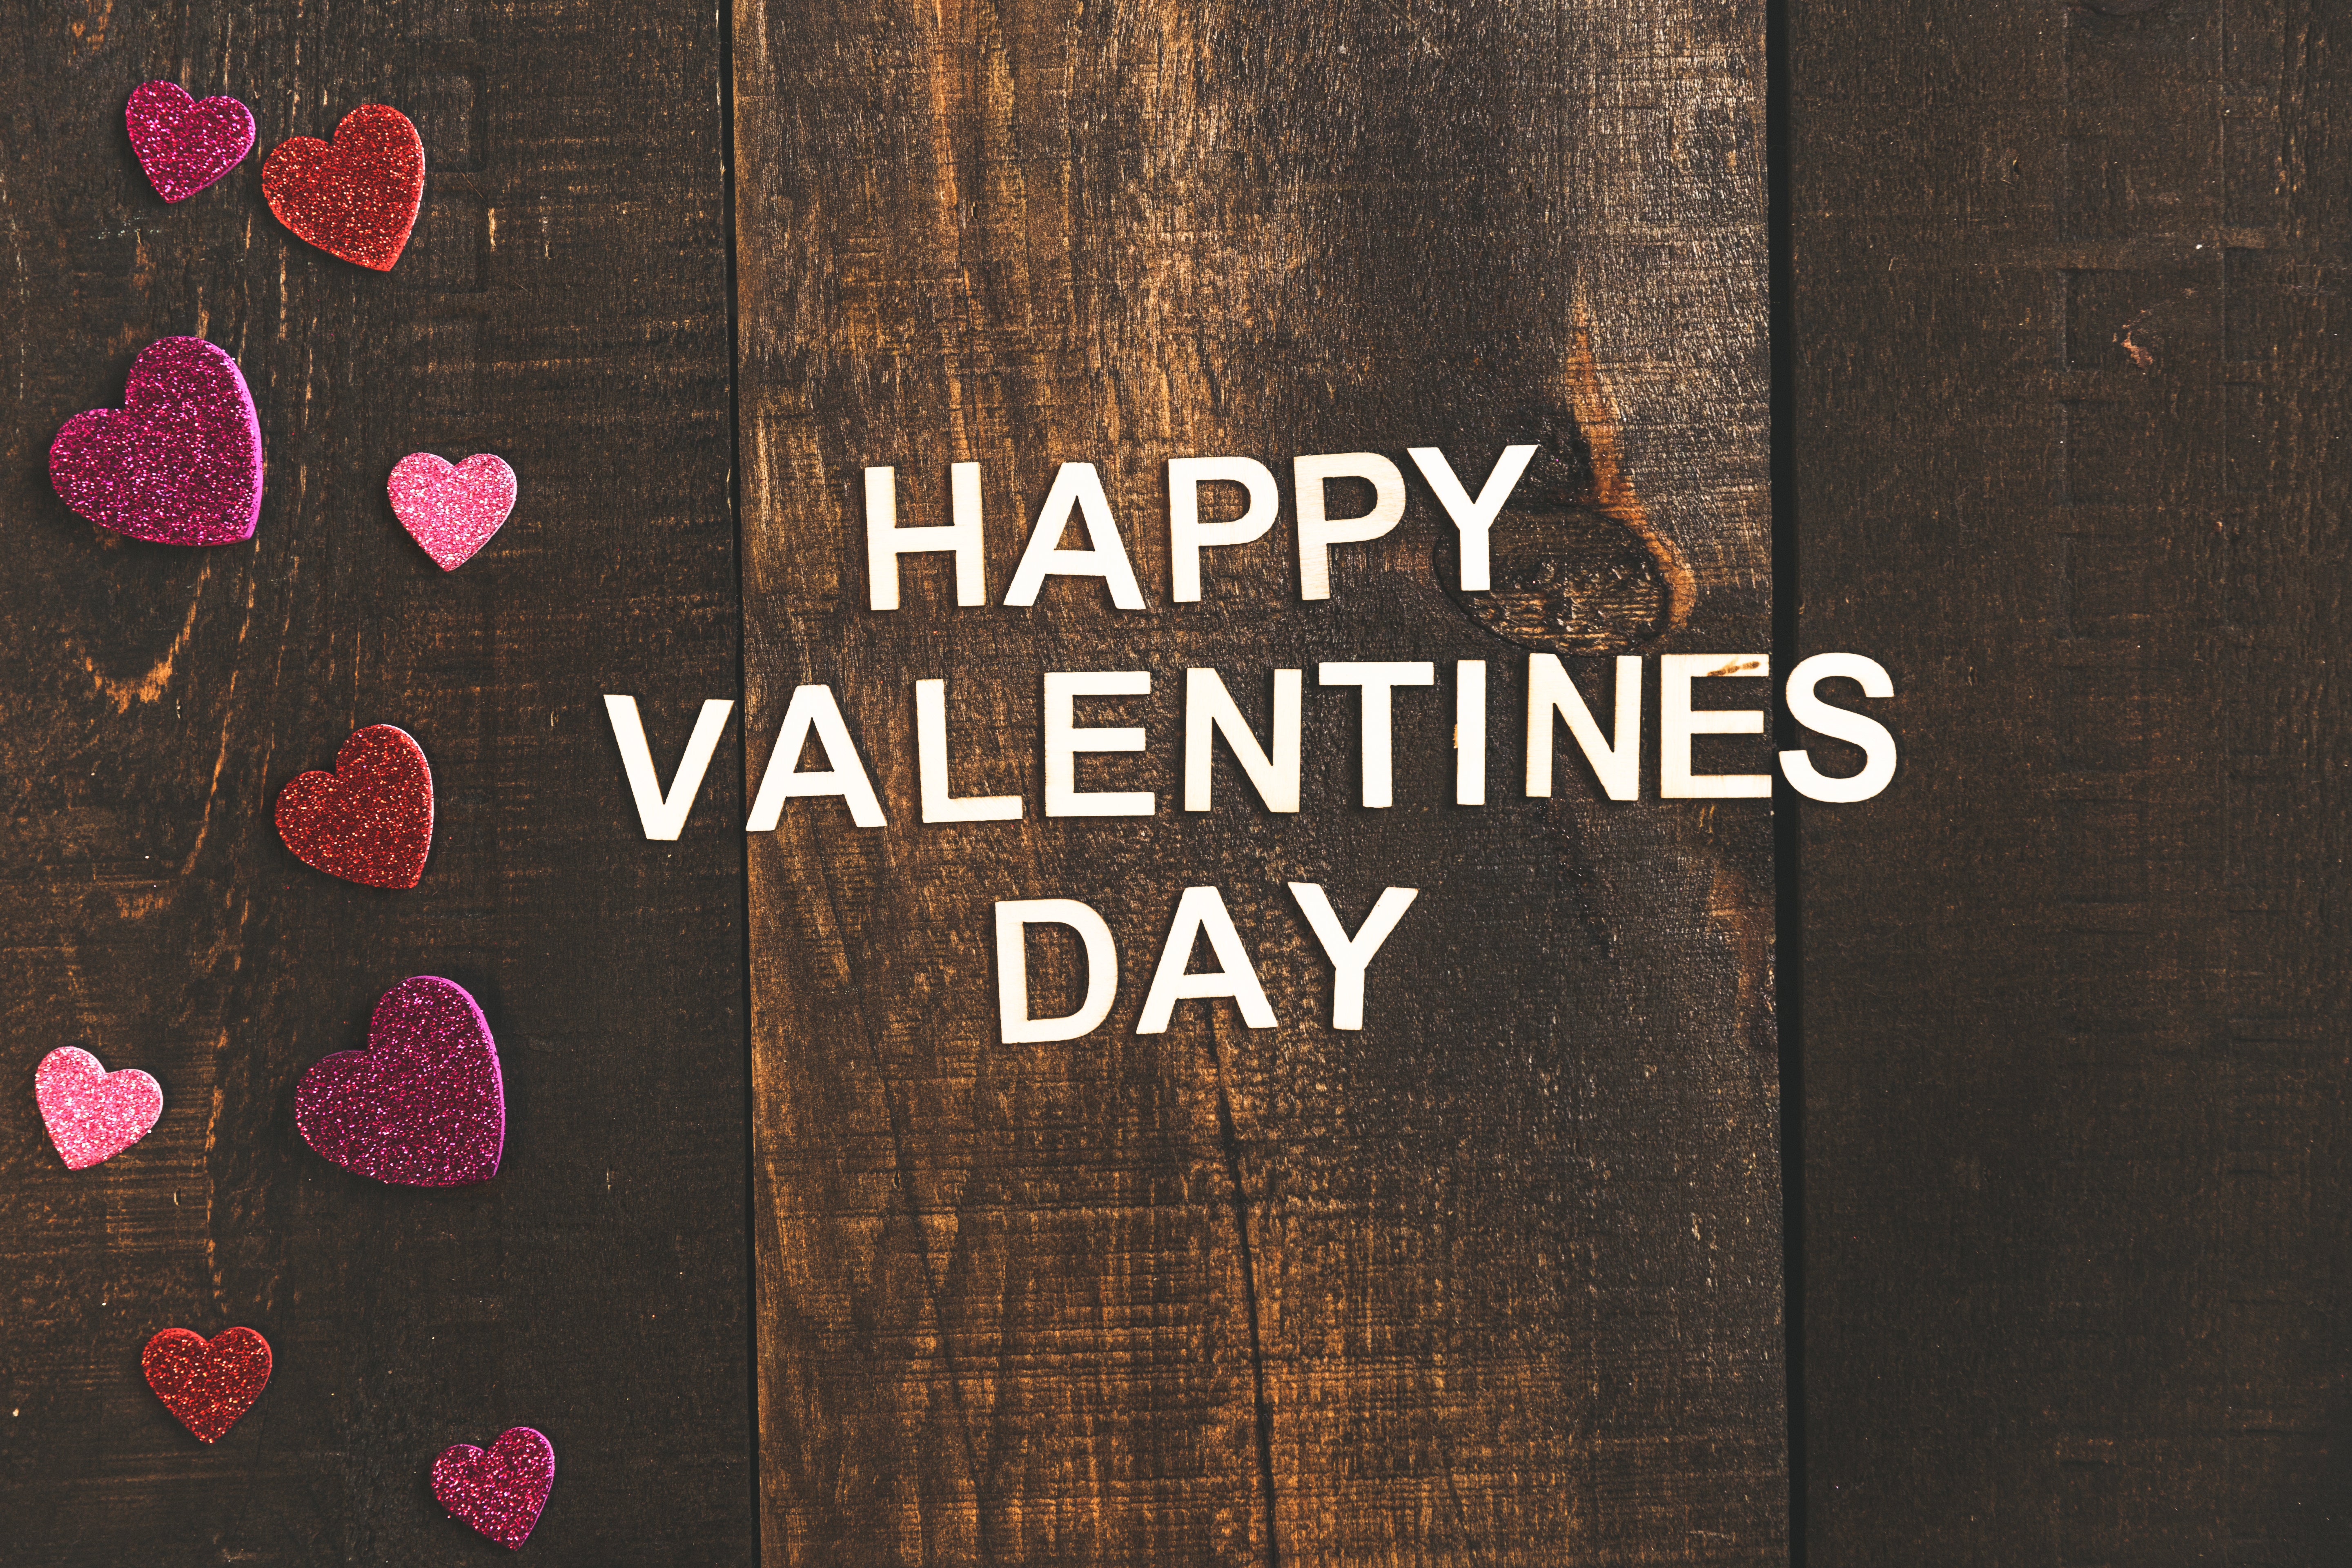 Free Valentine's Day Graphics to Brighten up the Holiday  Valentines day  background, Happy valentines day images, Valentine background